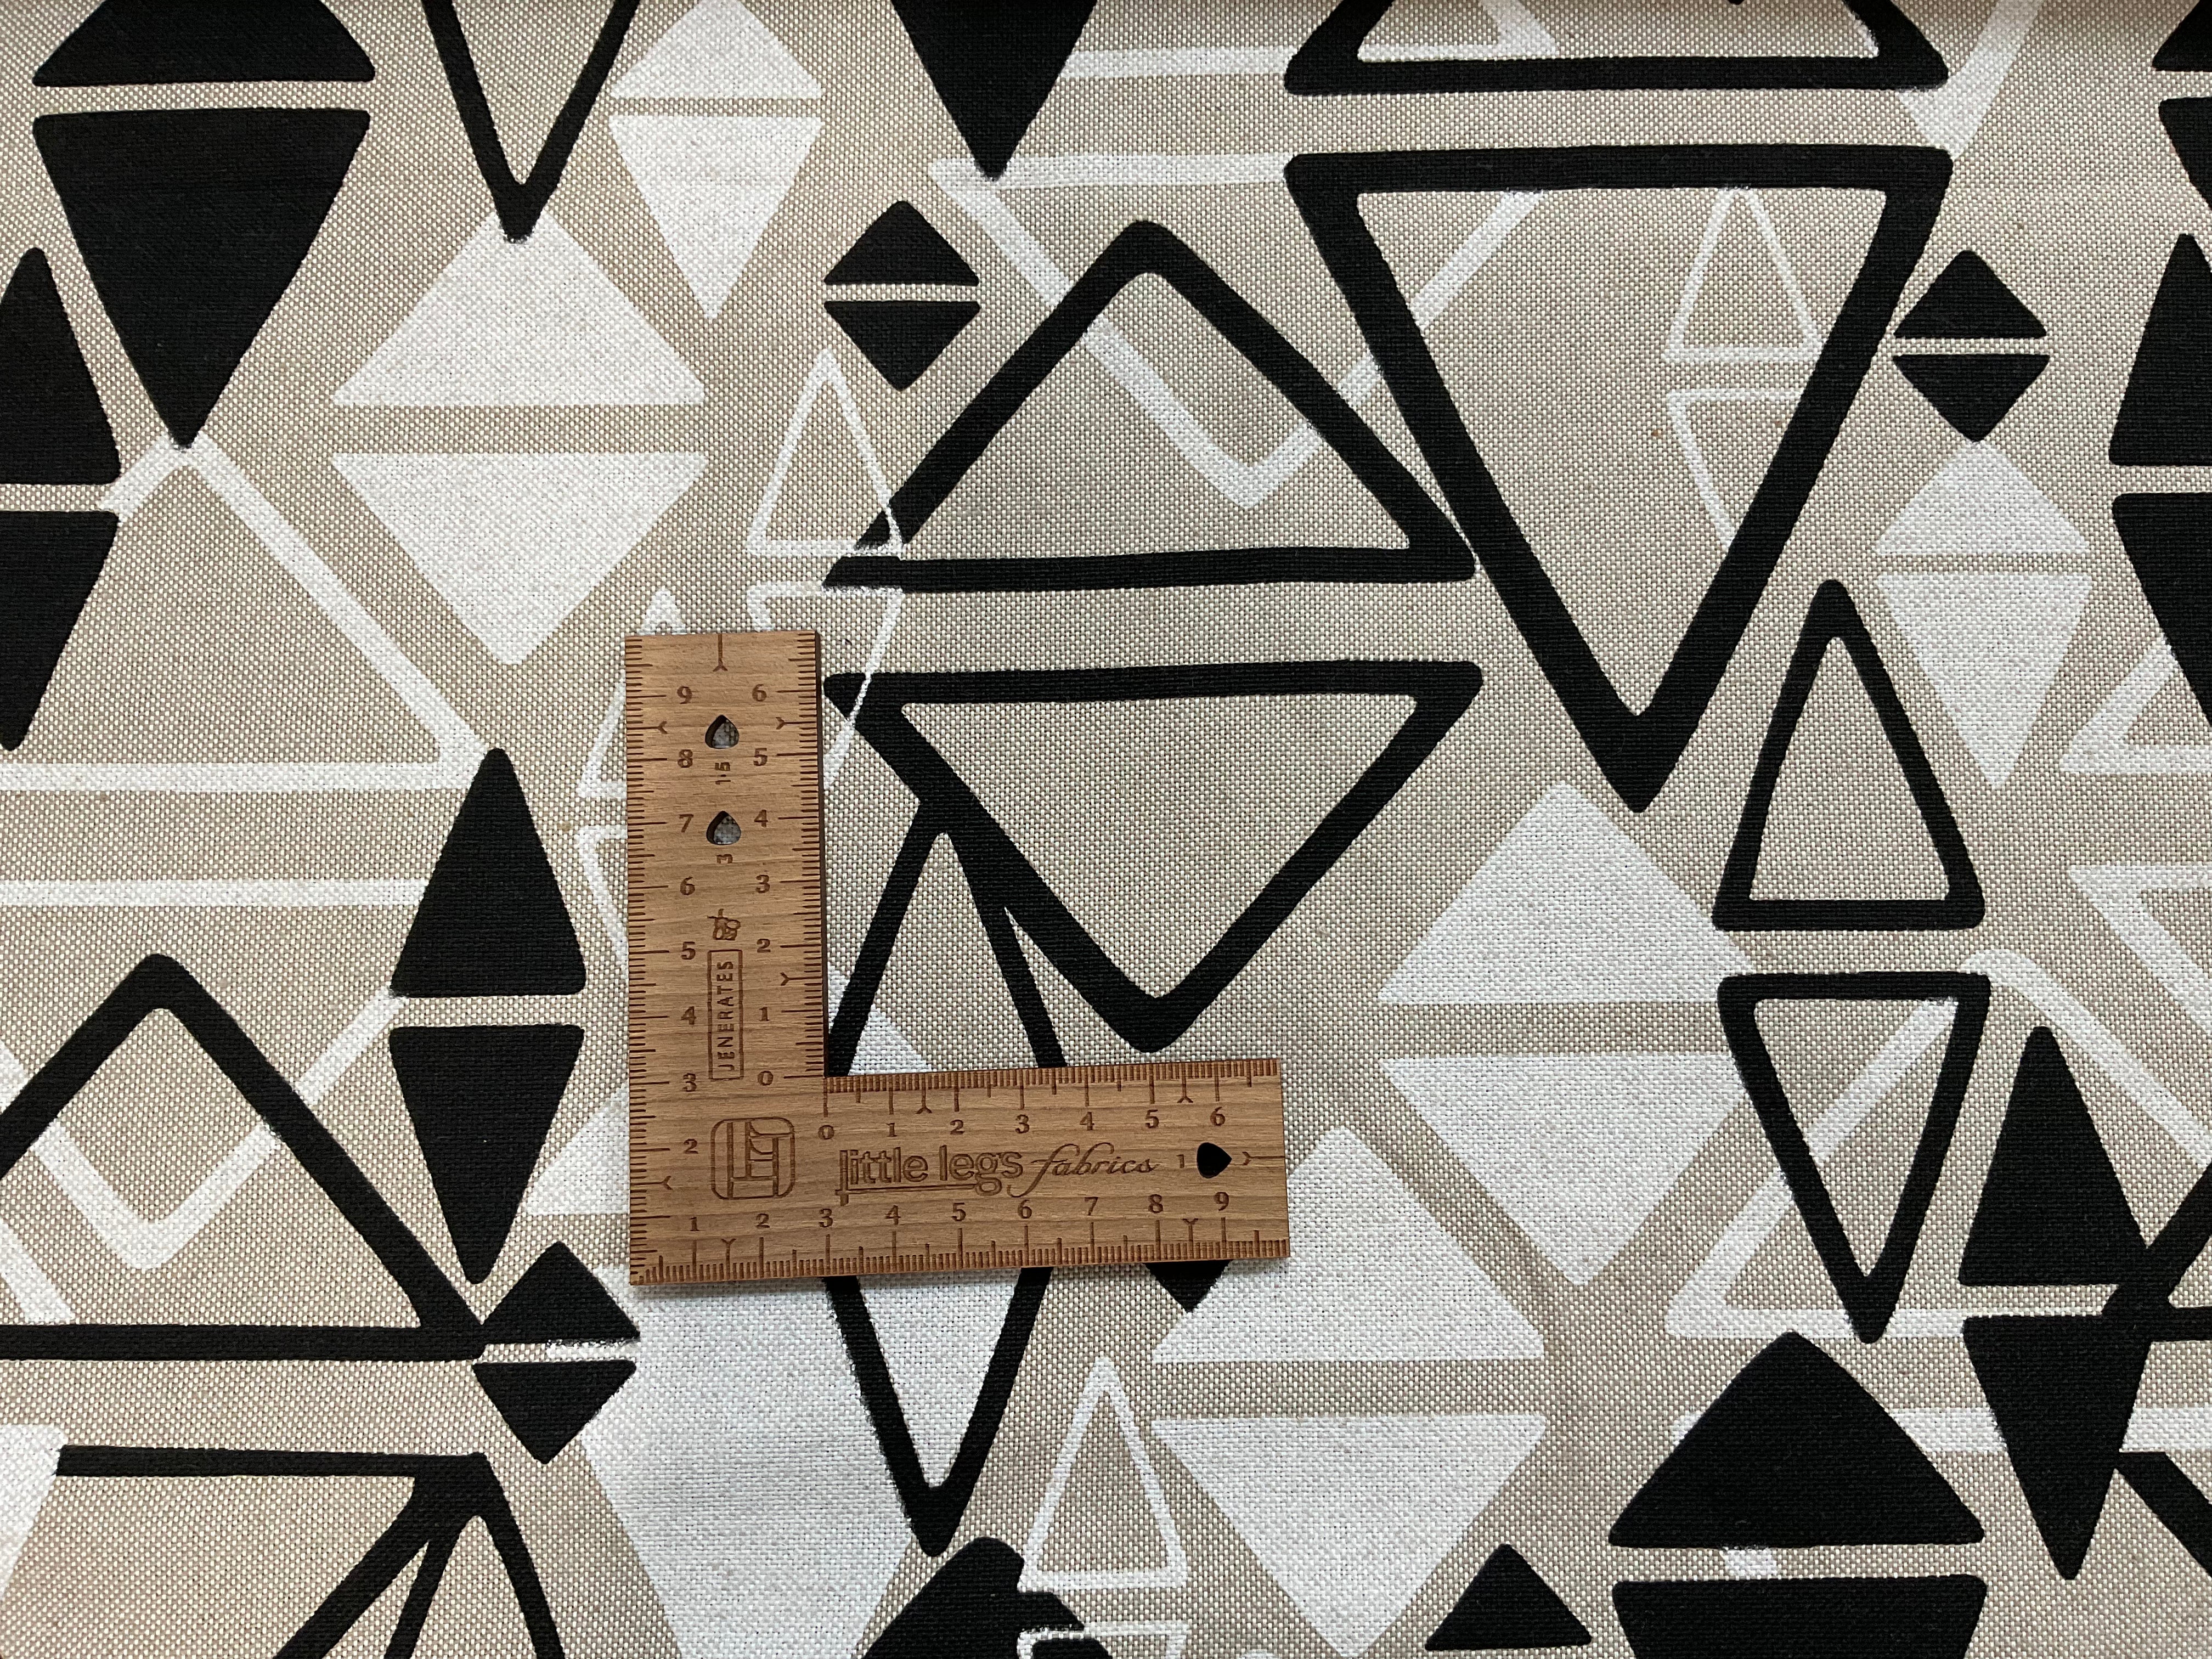 Triangles on Natural Linen Look Canvas Fabric